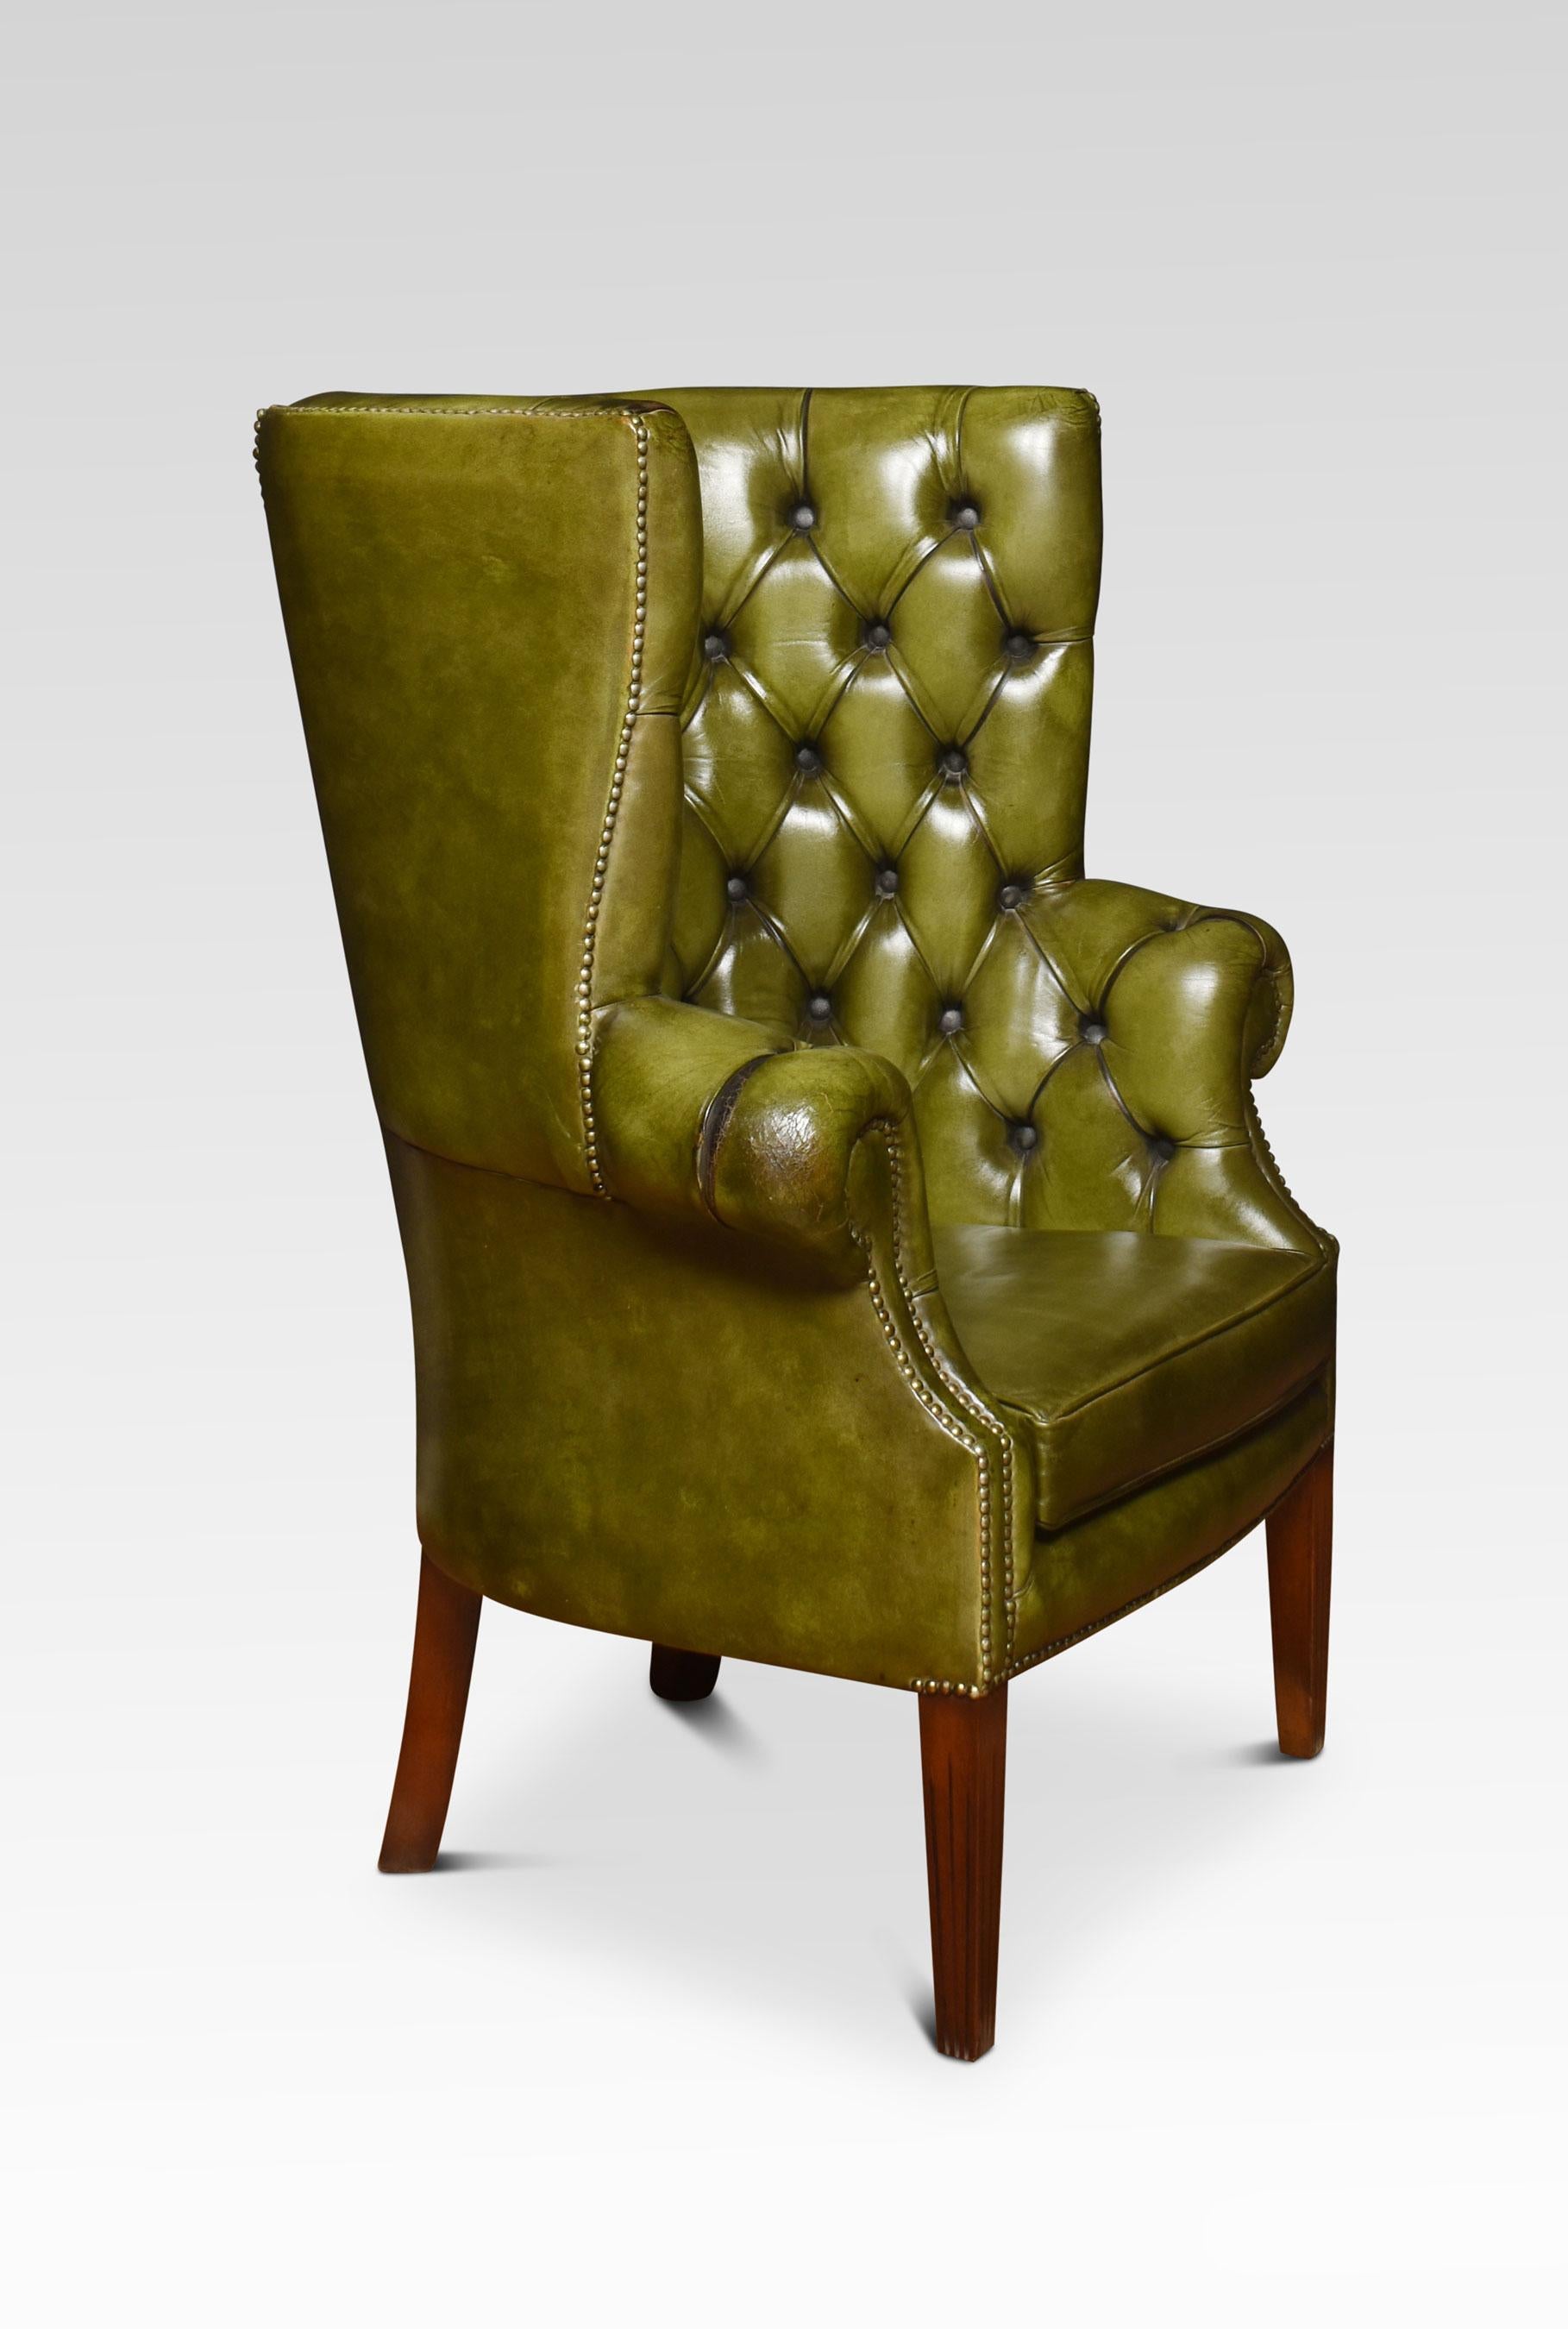 Green leather button-back Chesterfield style wingback armchair, having studded button back over the scrolled armrests. Raised on tapering carved legs.
Dimensions
Height 44.5 inches height to seat 18 inches
Width 35 inches
Depth 29 inches.